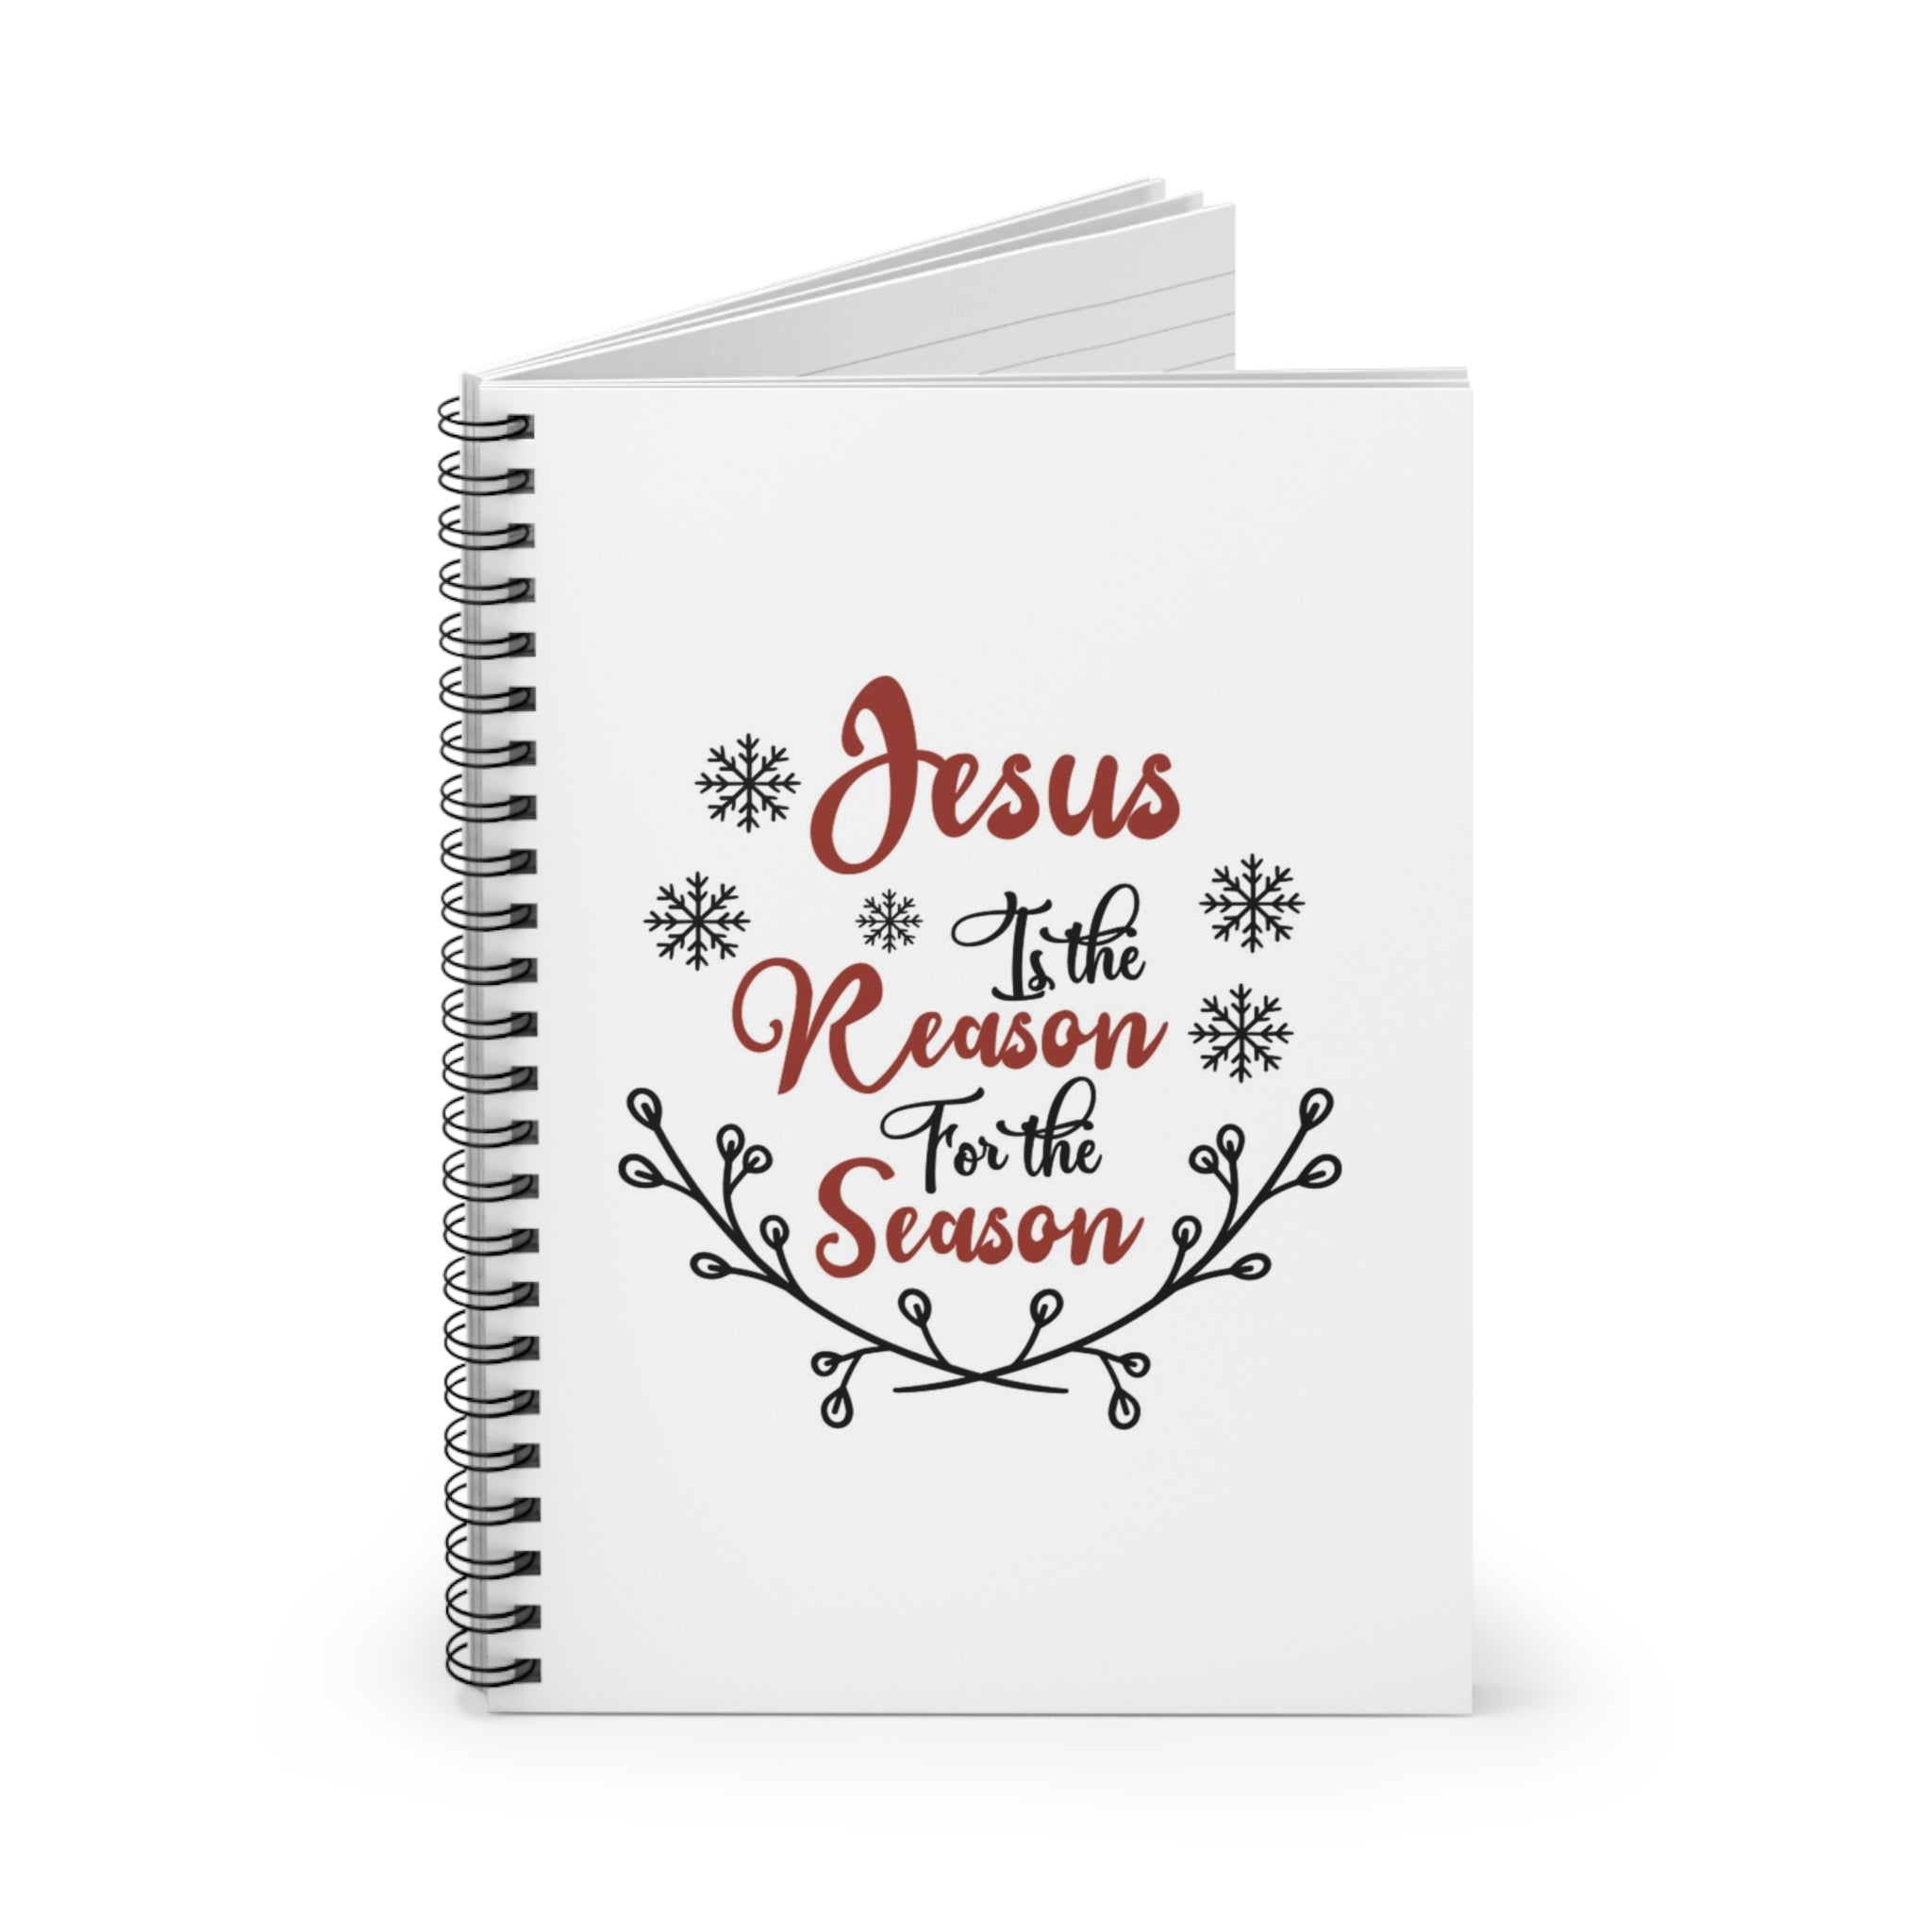 "Jesus is the reason" Spiral Notebook